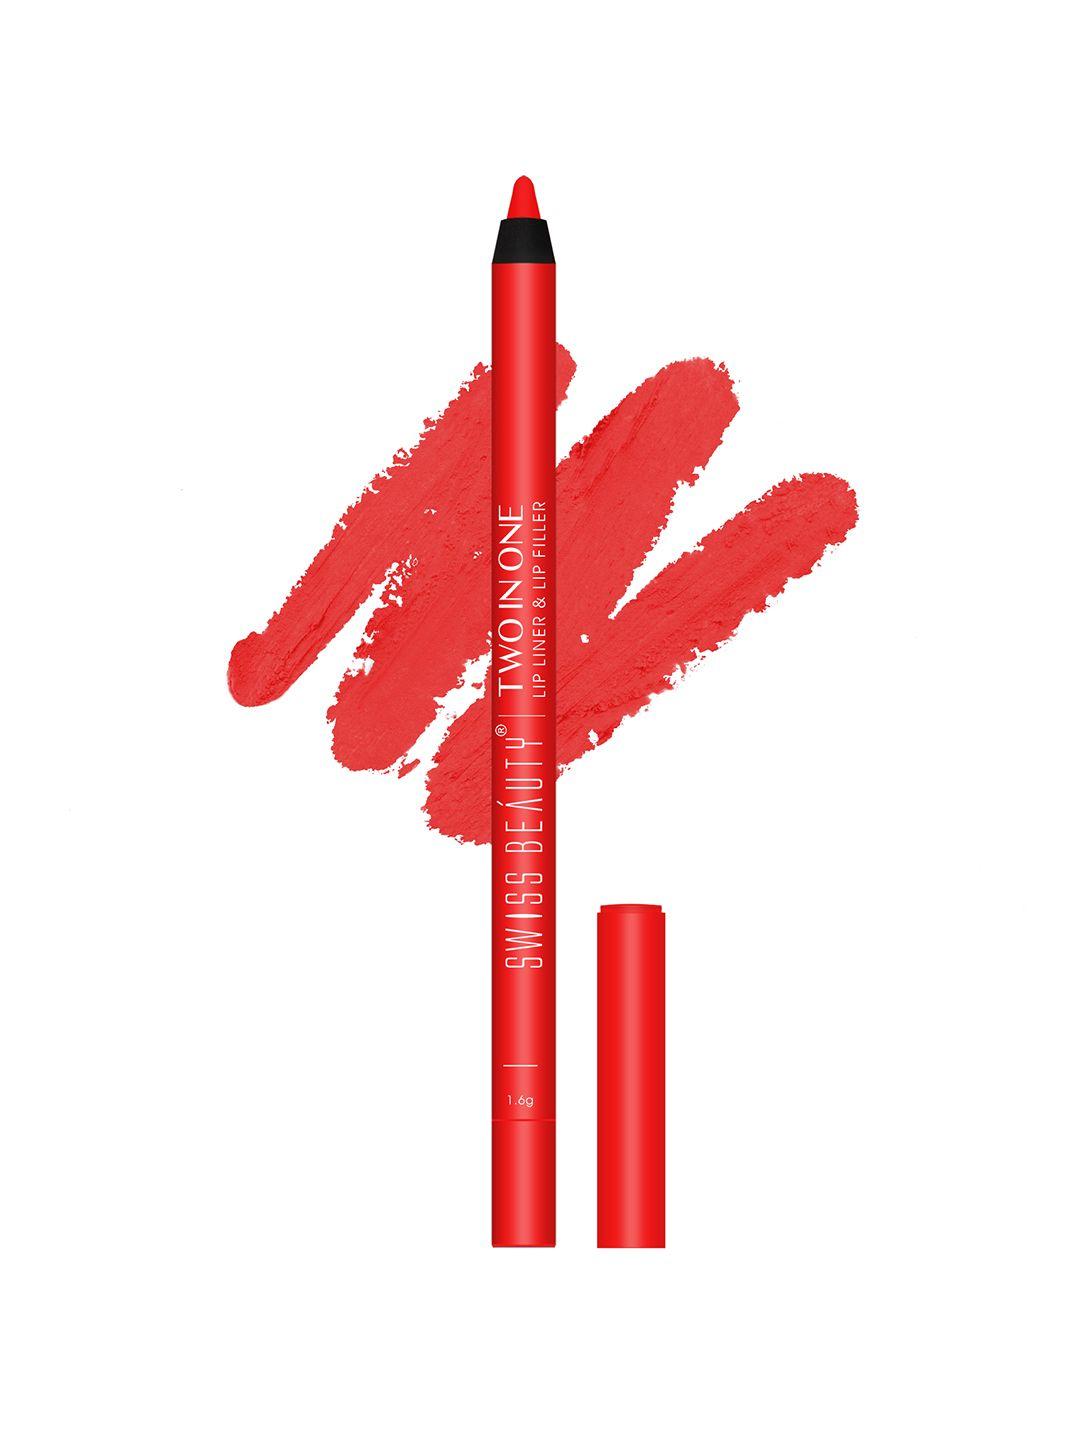 swiss beauty two in one smudge-proof waterproof lip liner & lip filler 1.6g - coral candy